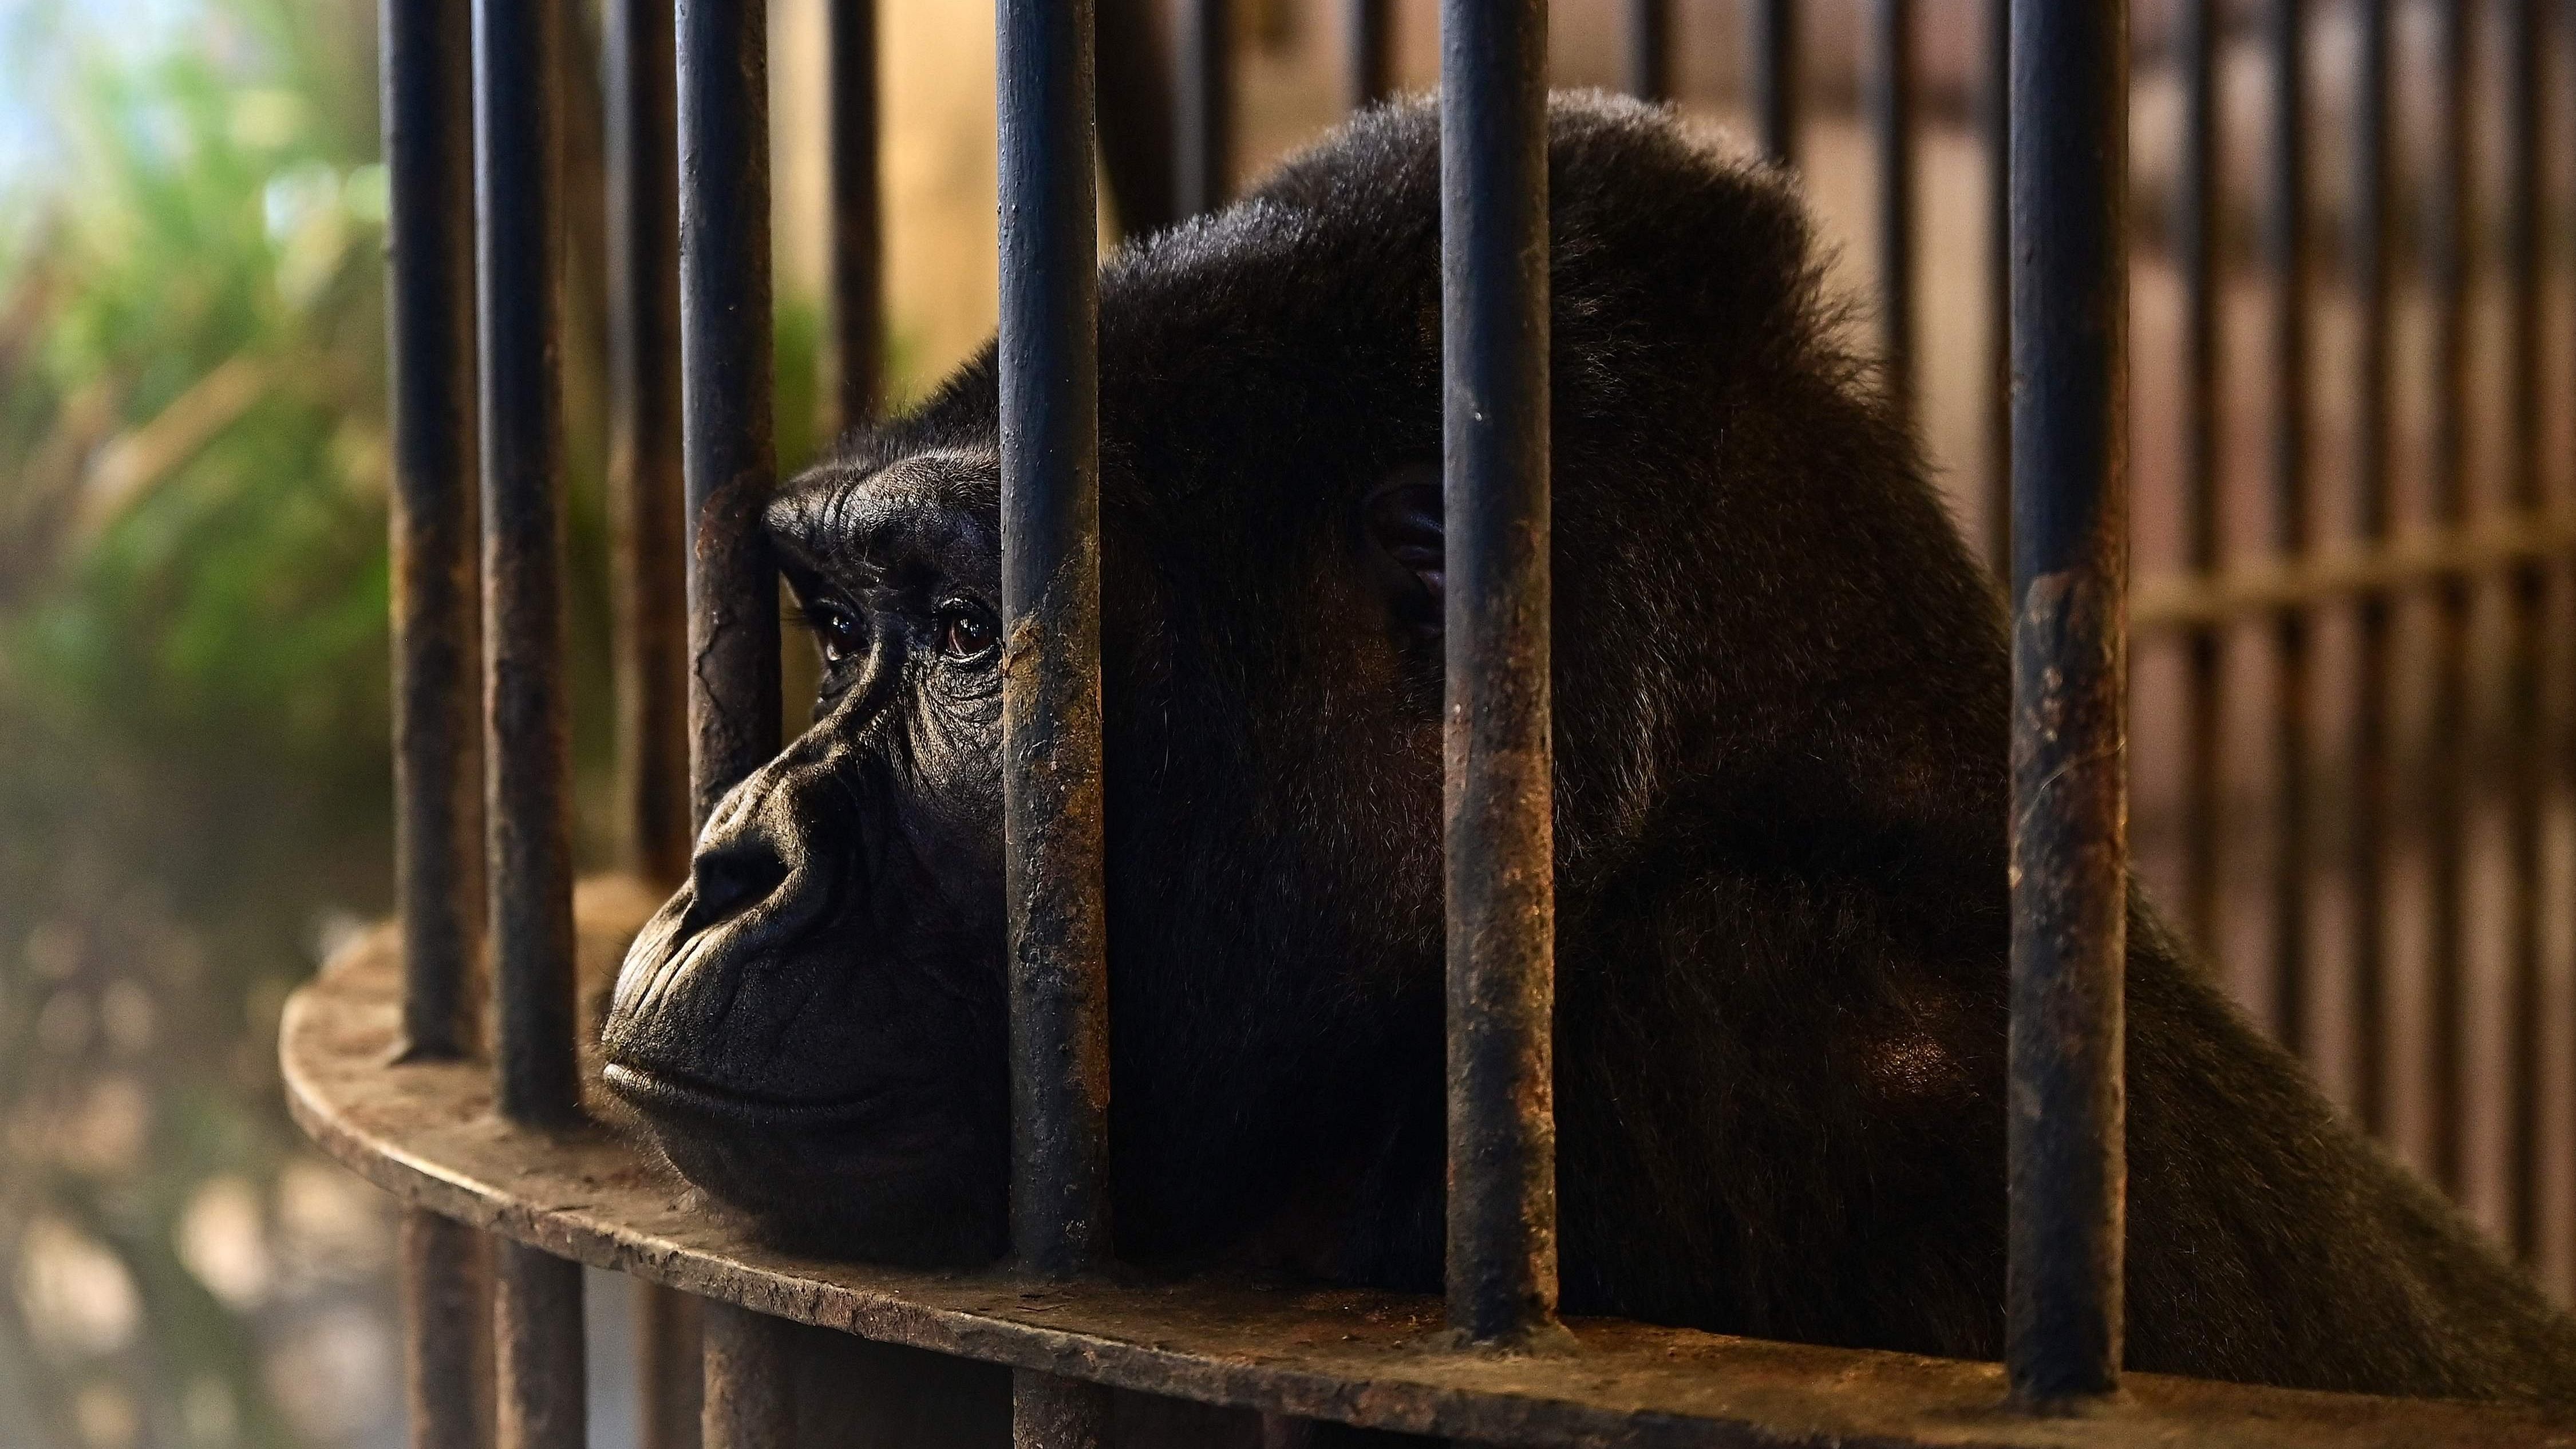 The gorilla has lived at Pata for more than three decades but her case made headlines again this month after the zoo offered a 100,000 baht ($2,800) reward for information leading to the arrest of whoever graffitied "Free Bua Noi!" on one of the mall's walls. Credit: AFP Photo